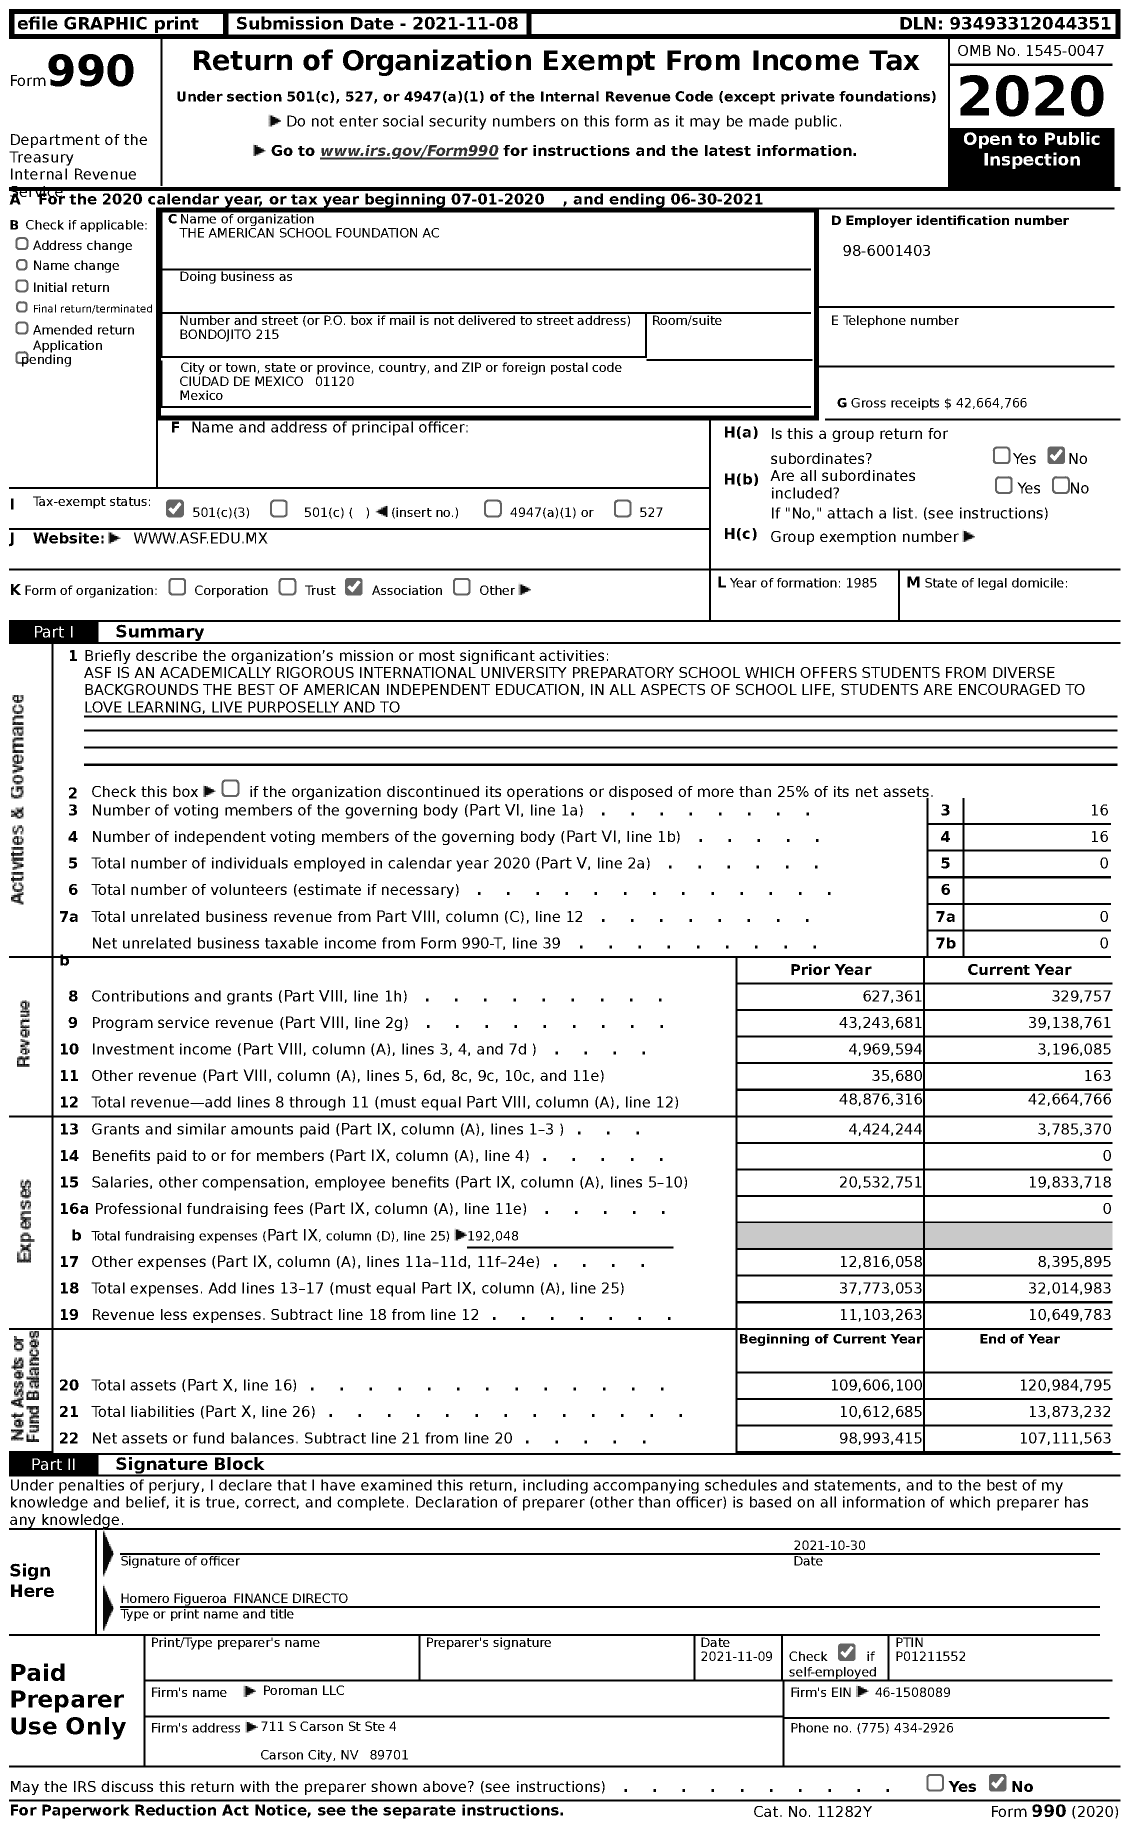 Image of first page of 2020 Form 990 for The American School Foundation Ac (ASF)